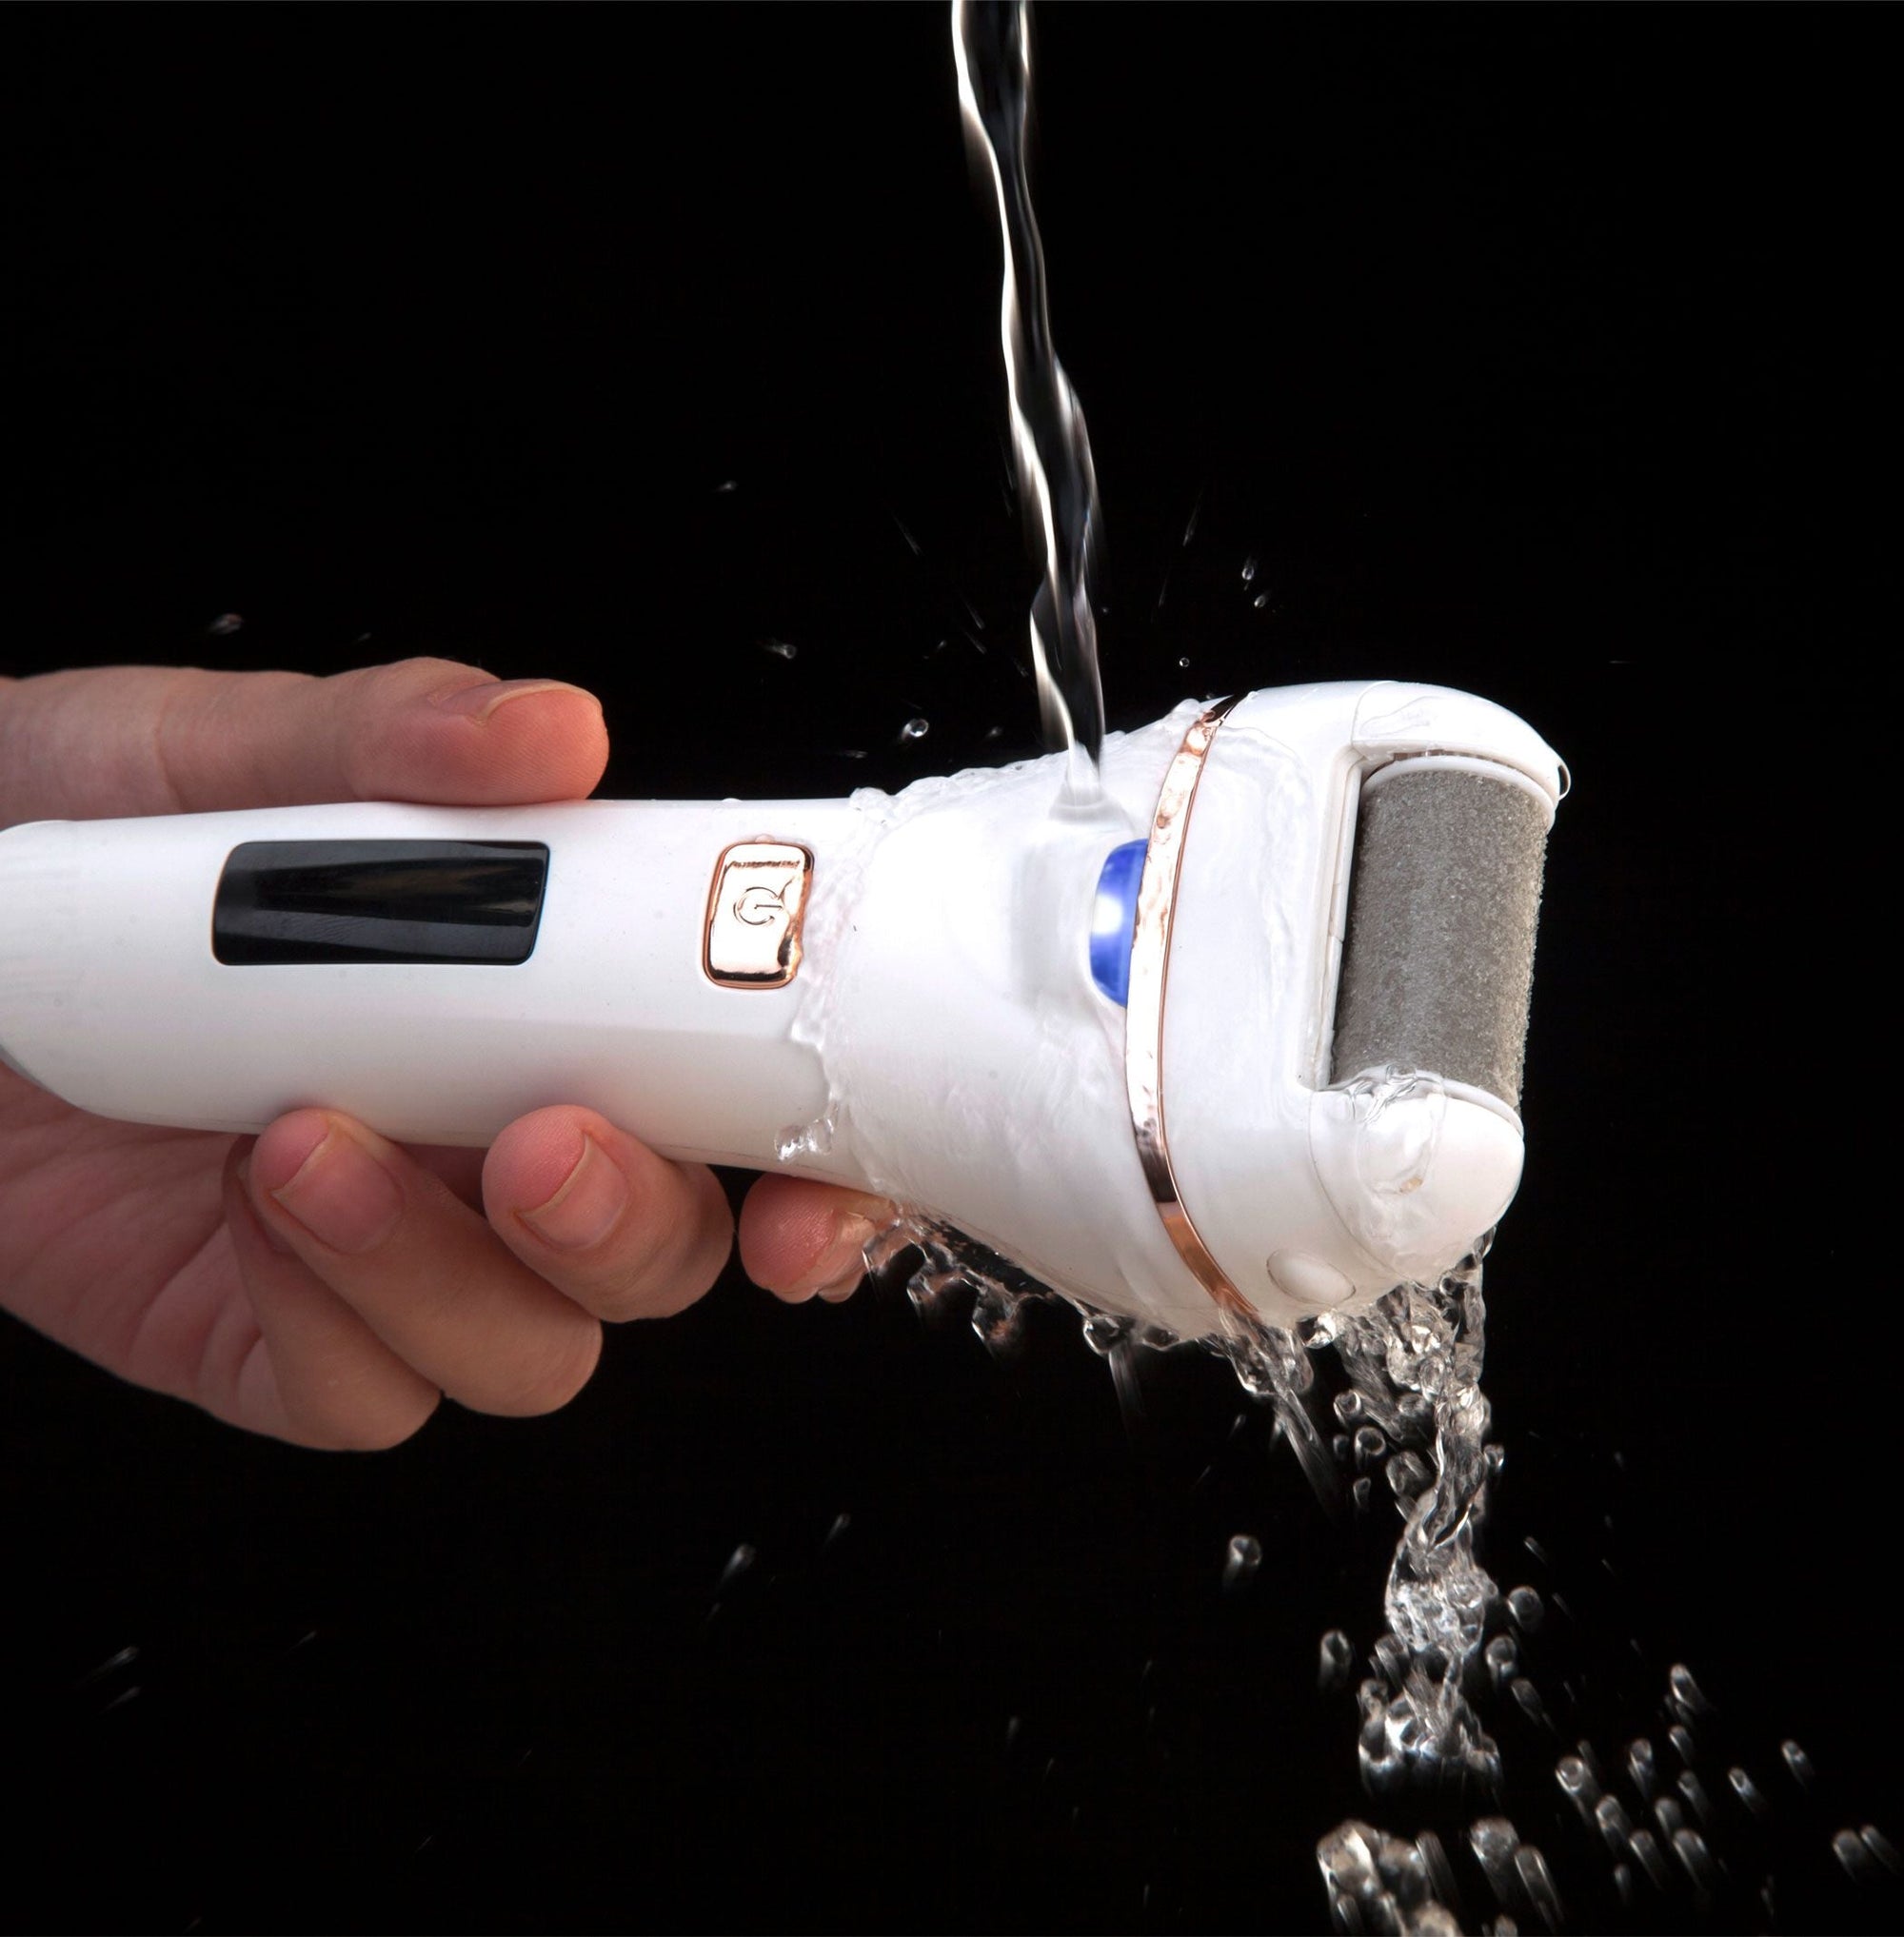 Go smooth 60 second pedi hard skin remover under running water to demonstrate IPX5 water resistant feature